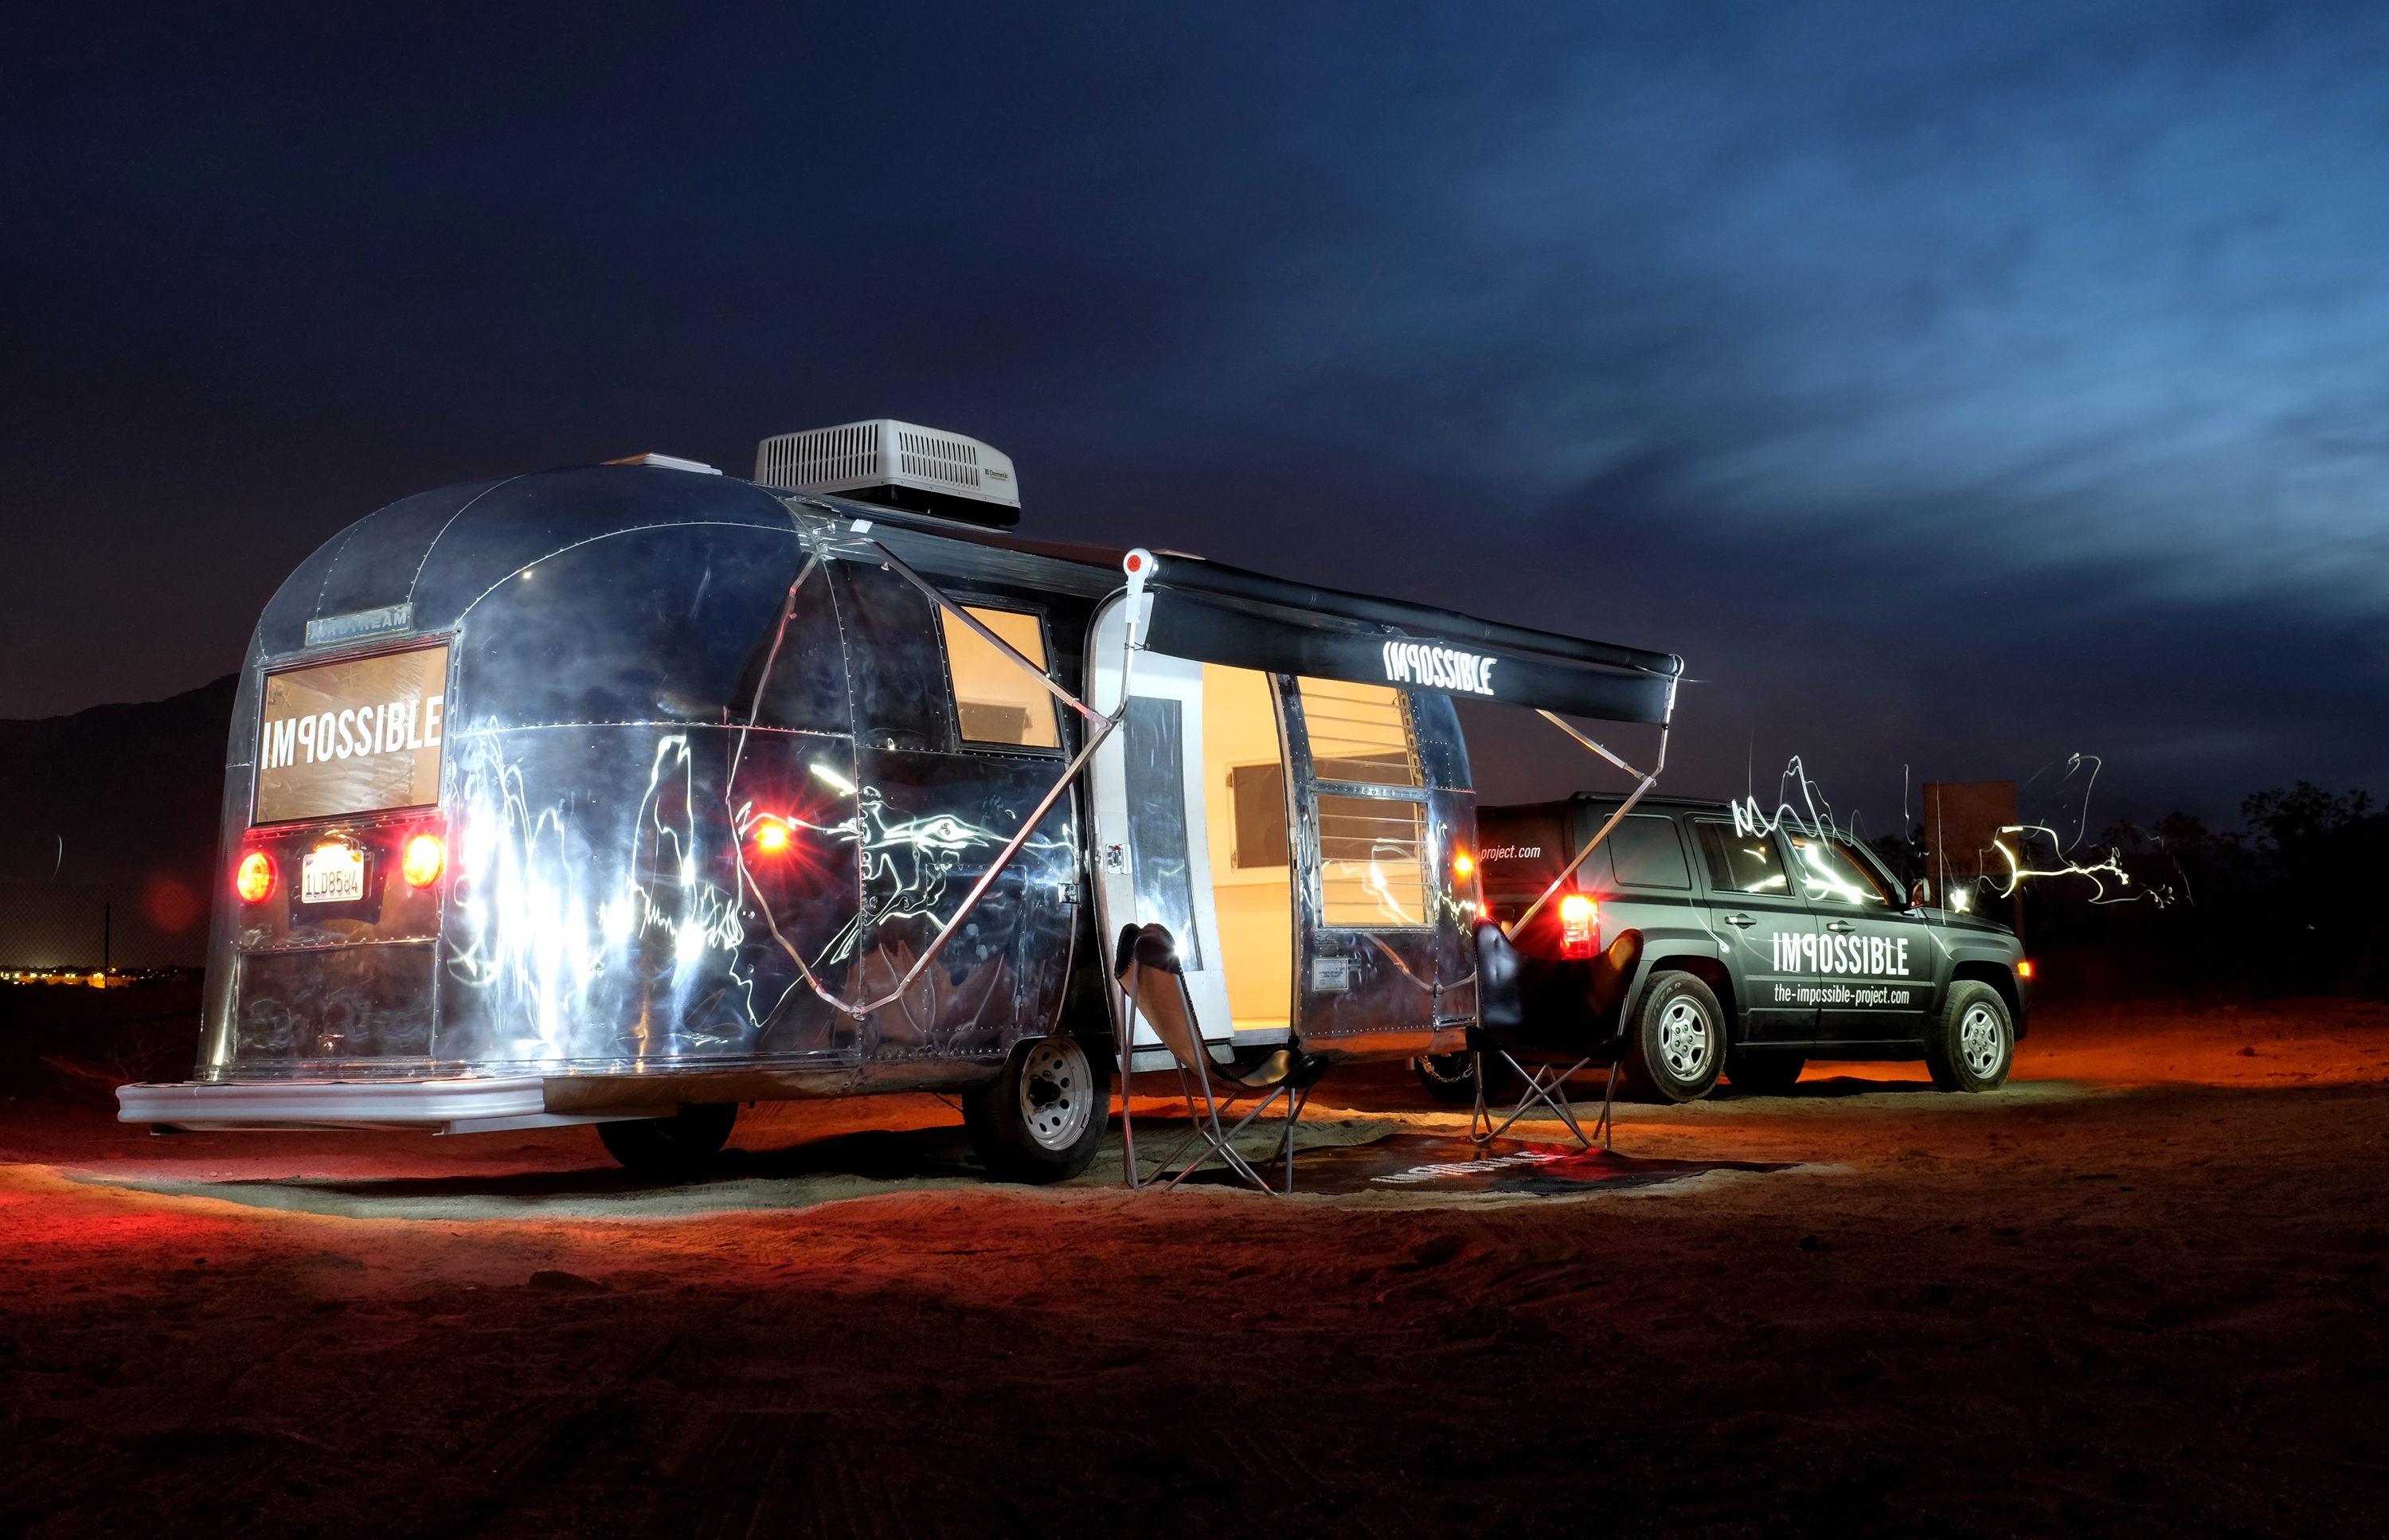 IMPOSSIBLE USA's refurbished Airstream trailer